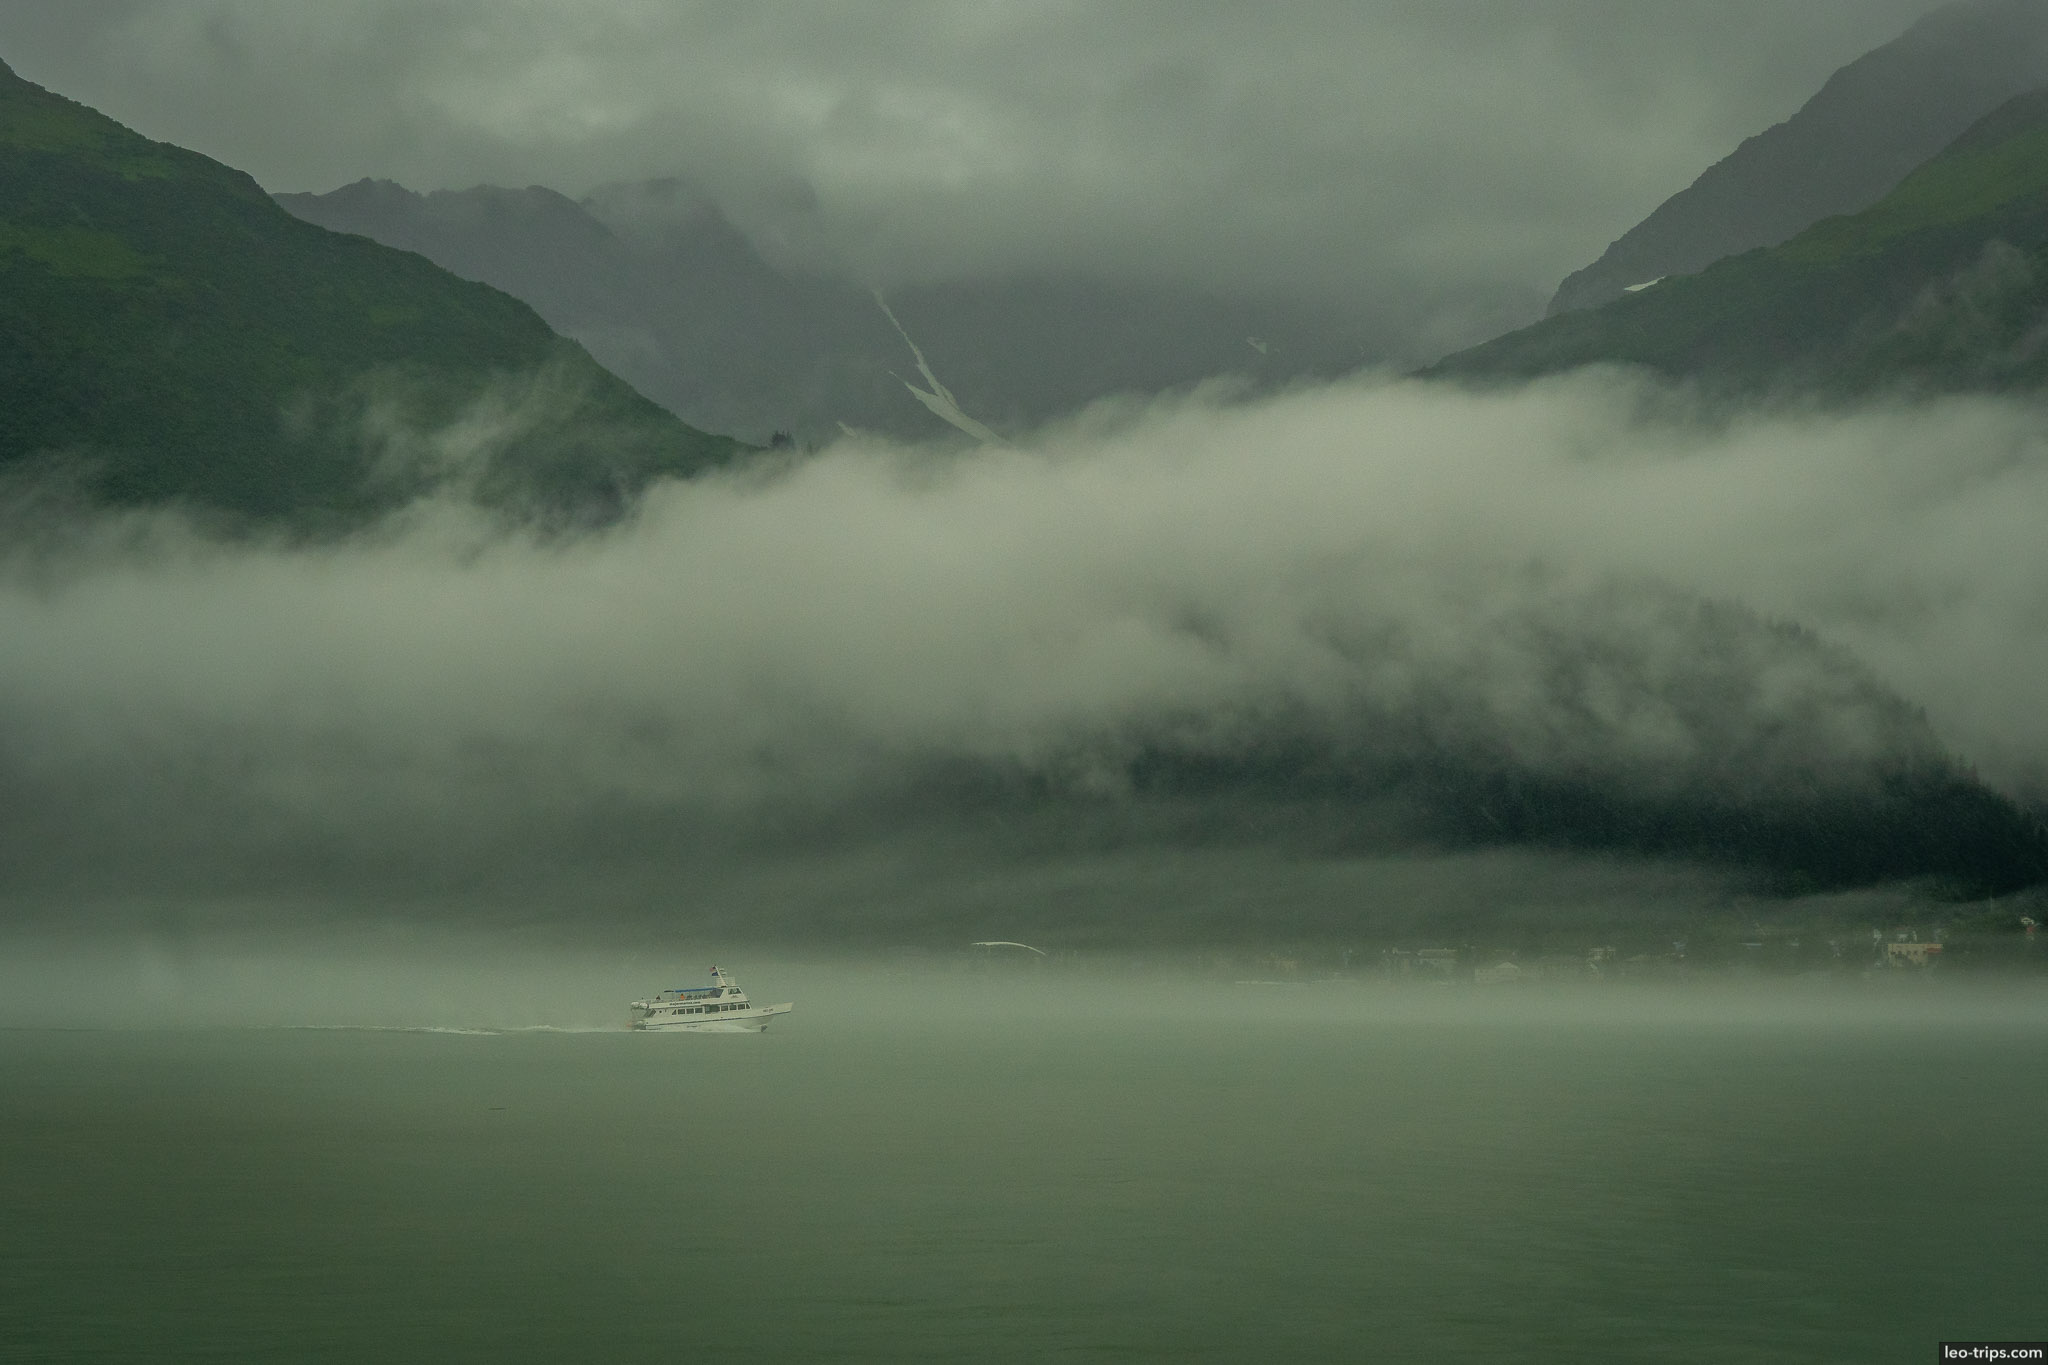 Boat and Mountains with low clouds resurrection bay